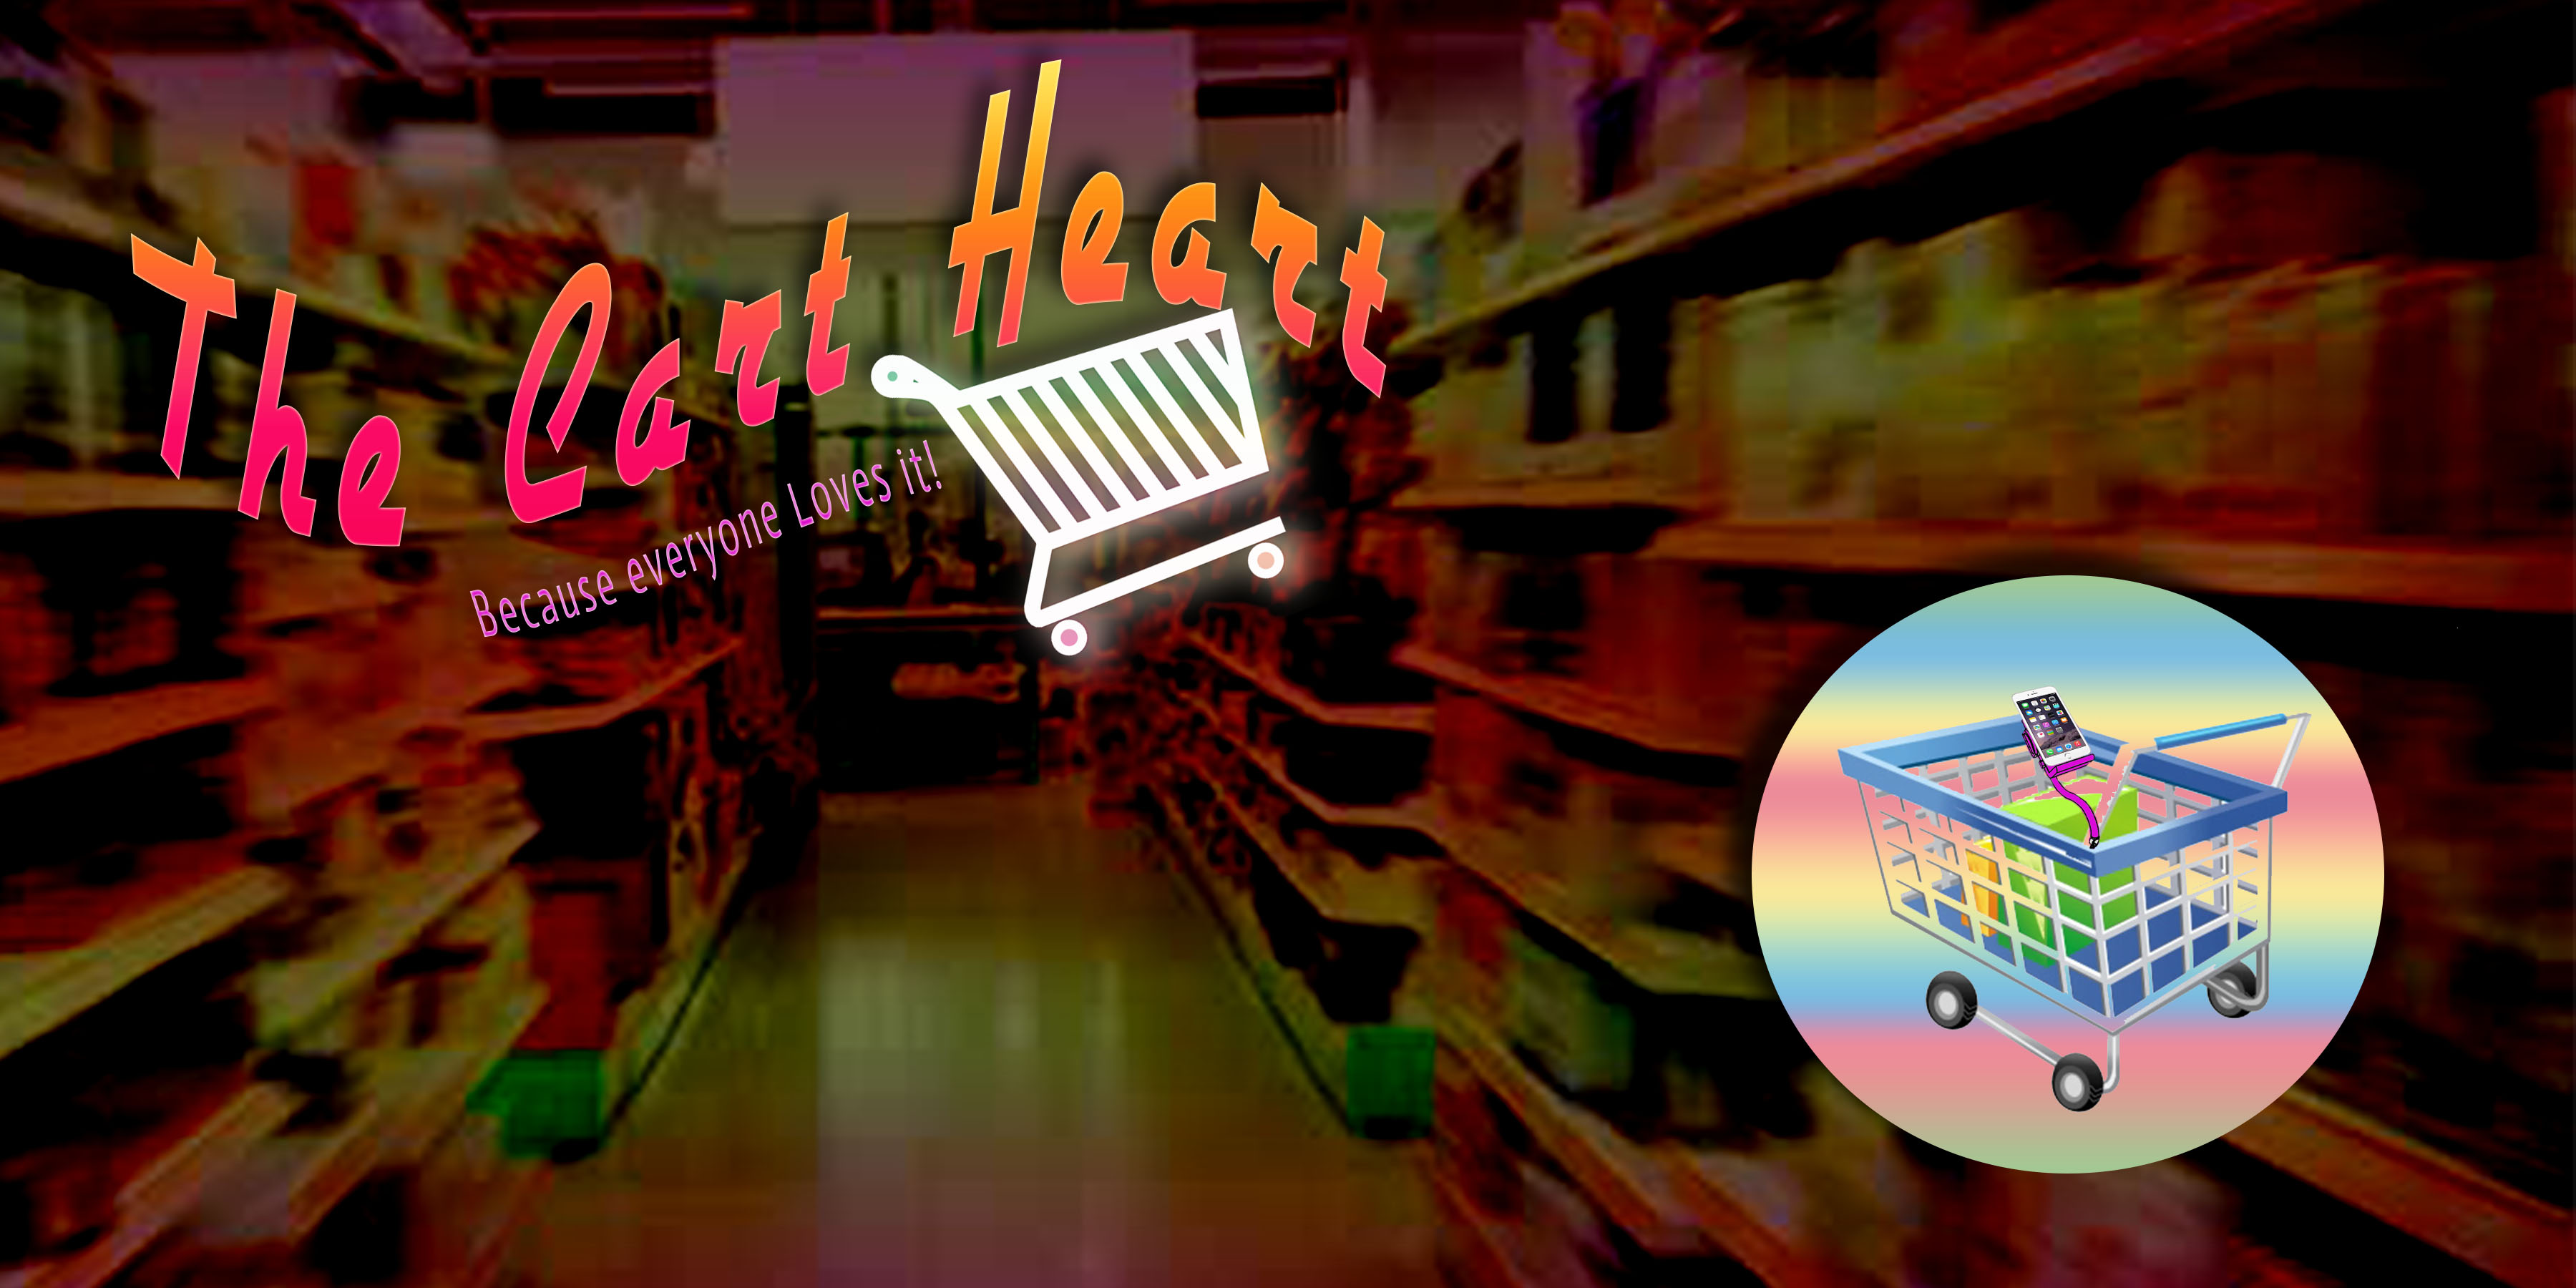 Keeping your hands free while you shop is now made easy thanks to the Cart Heart,